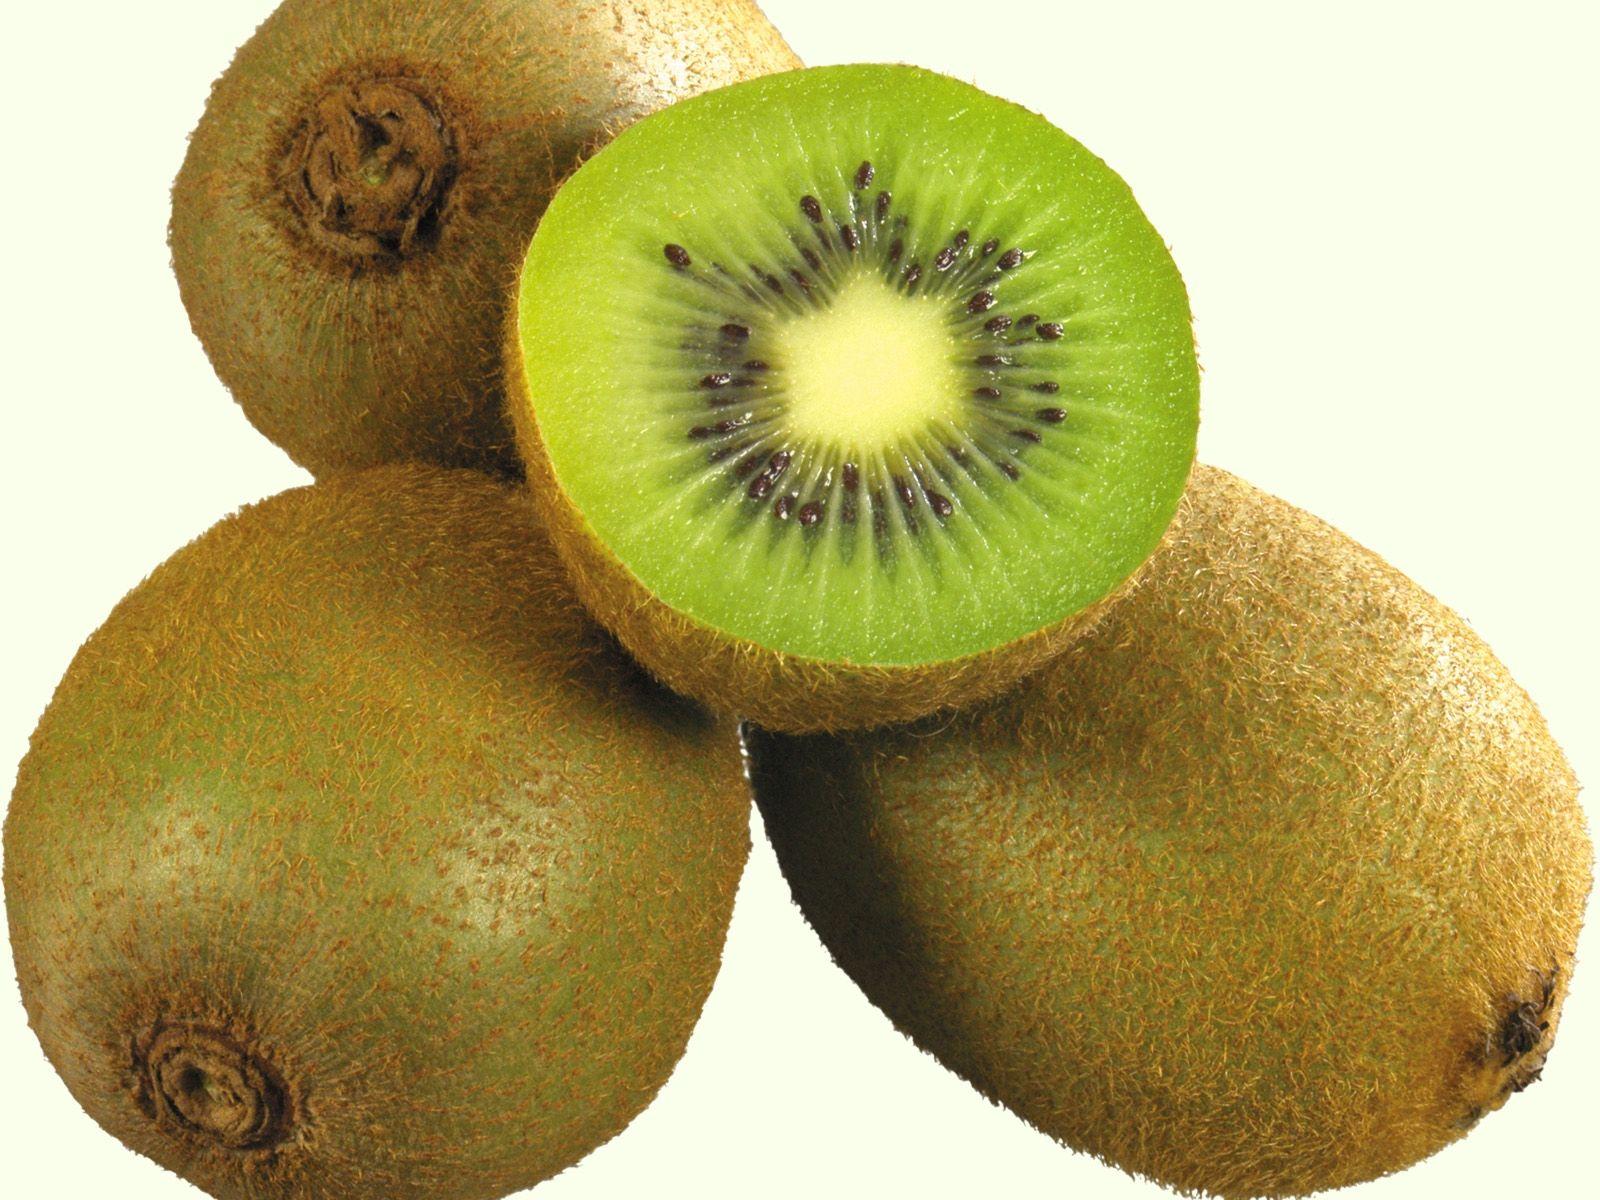 Gallery by tag: kiwi wallpaper